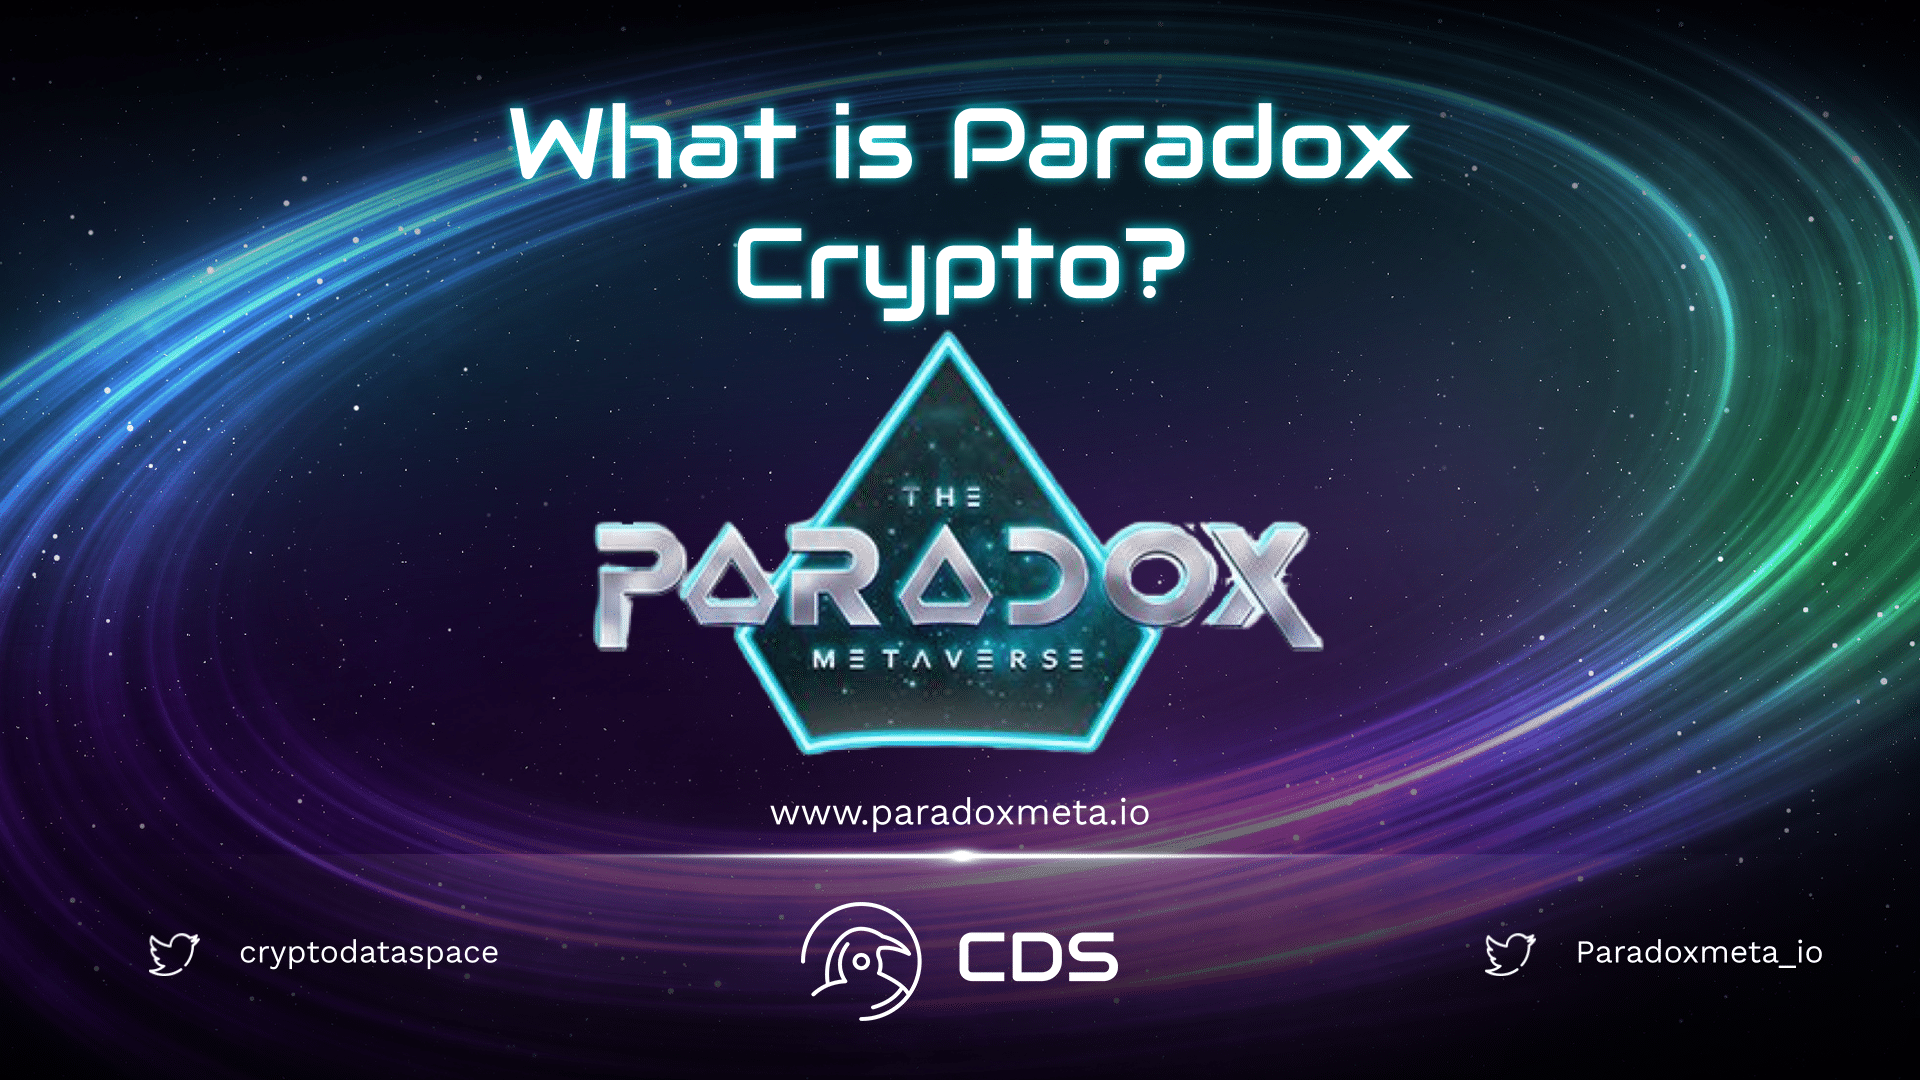 What is Paradox Crypto Everything You Wondered about Paradox Metaverse